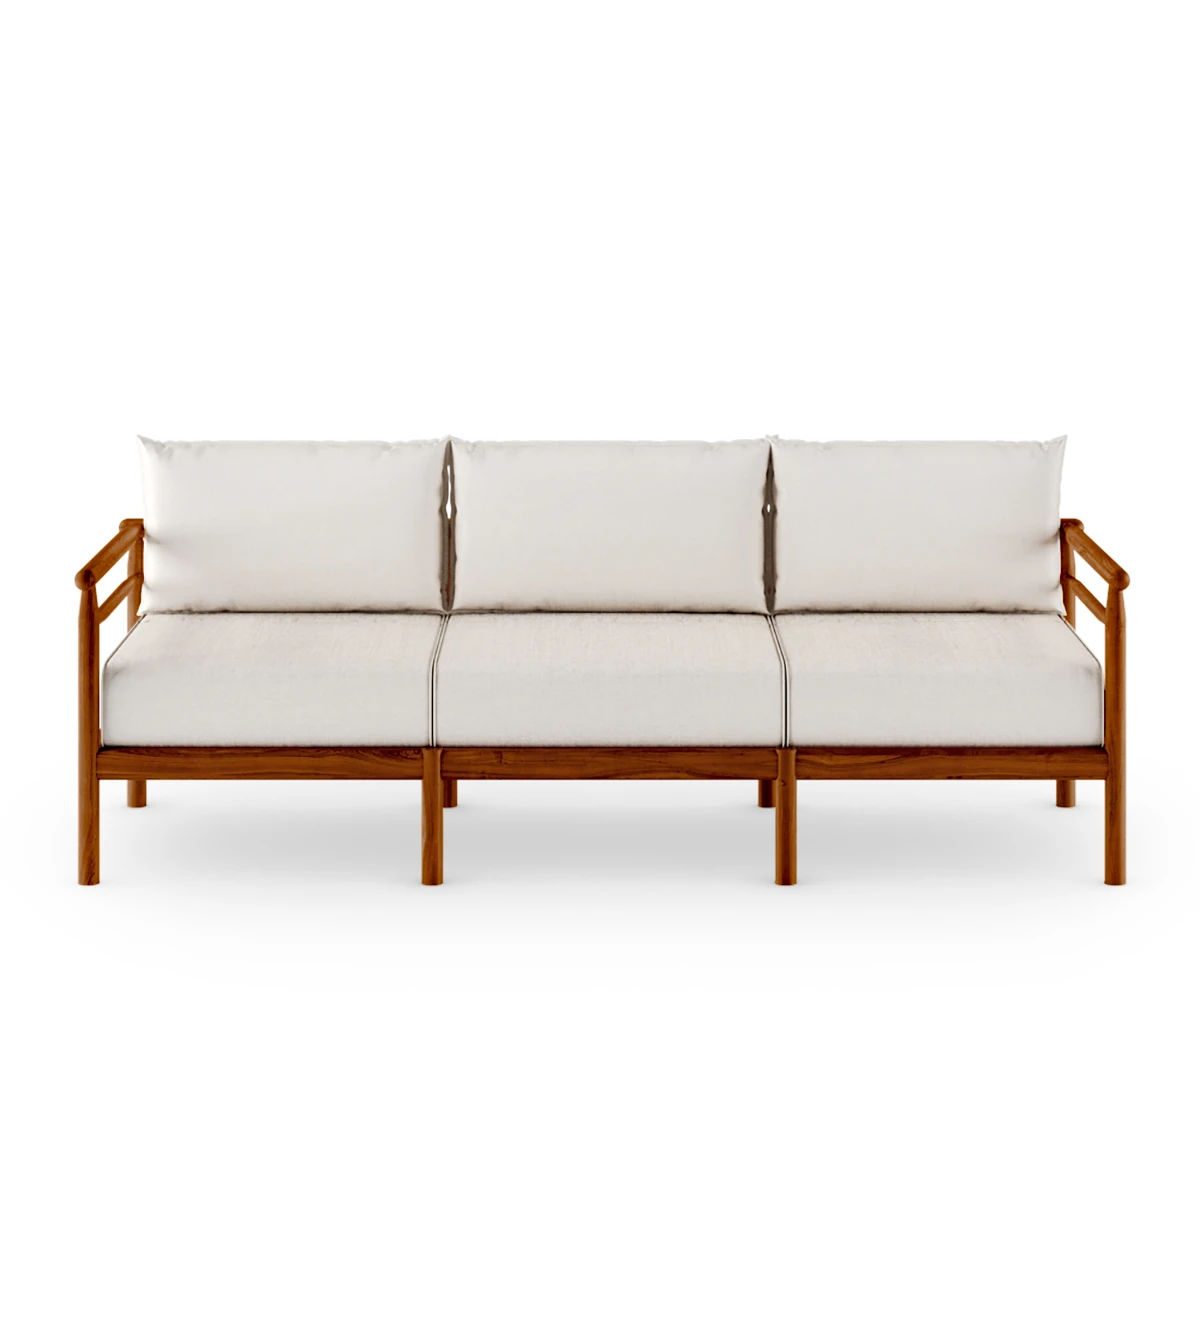 3 seater sofa with fabric upholstered cushions and honey-colored natural wood structure.